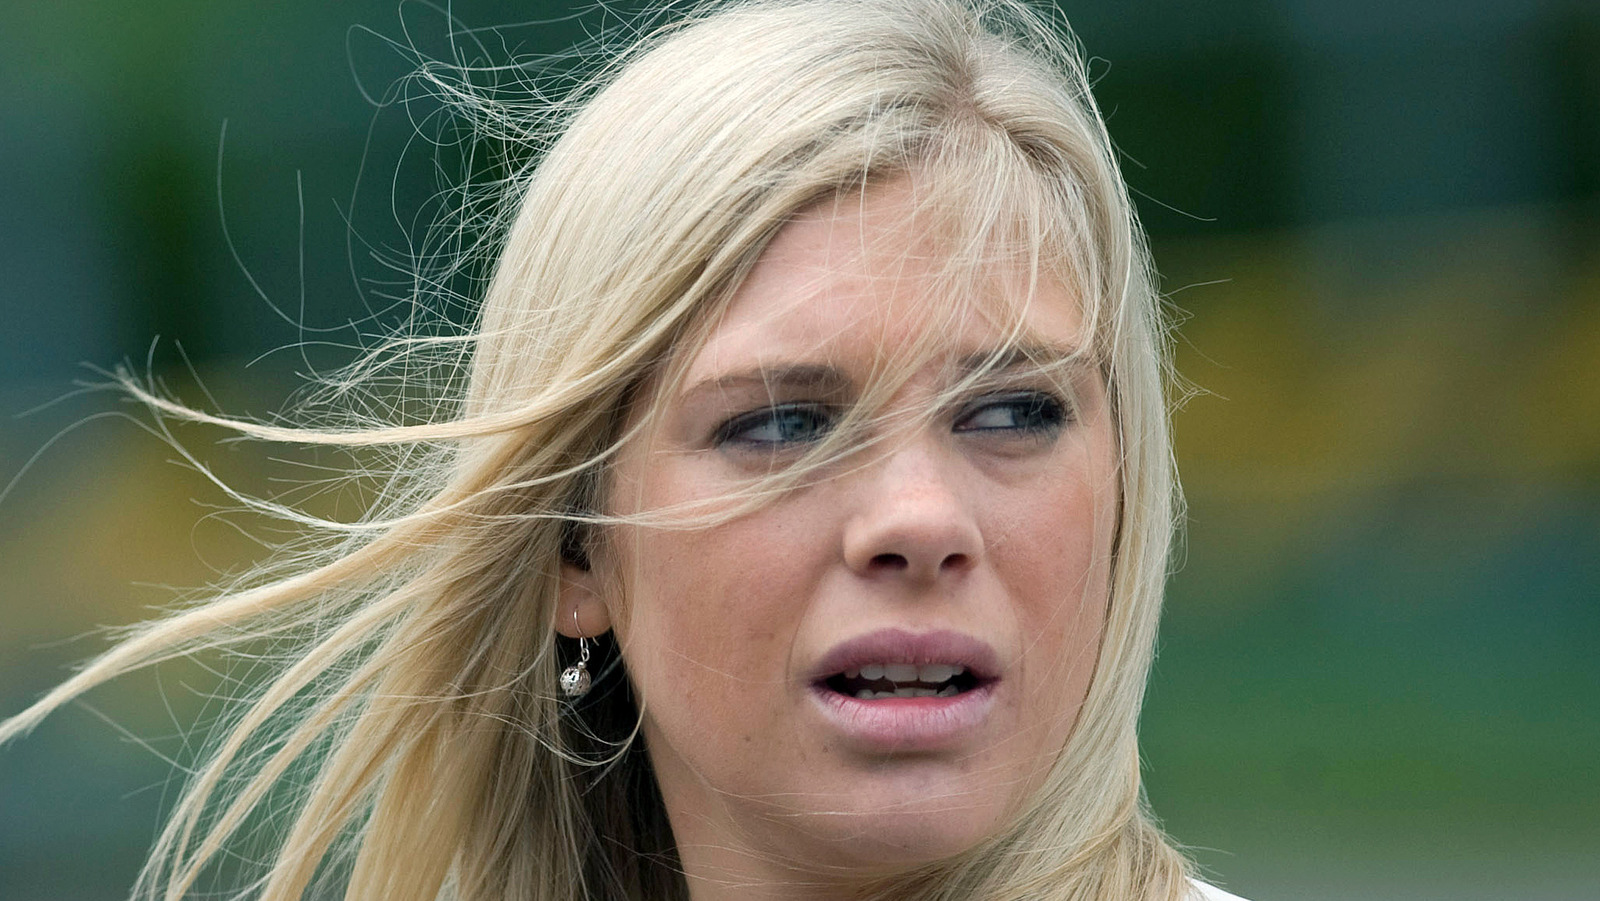 Evidence Prince Harry S Relationship With Chelsy Davy Was More Heartbreaking Than We Realized